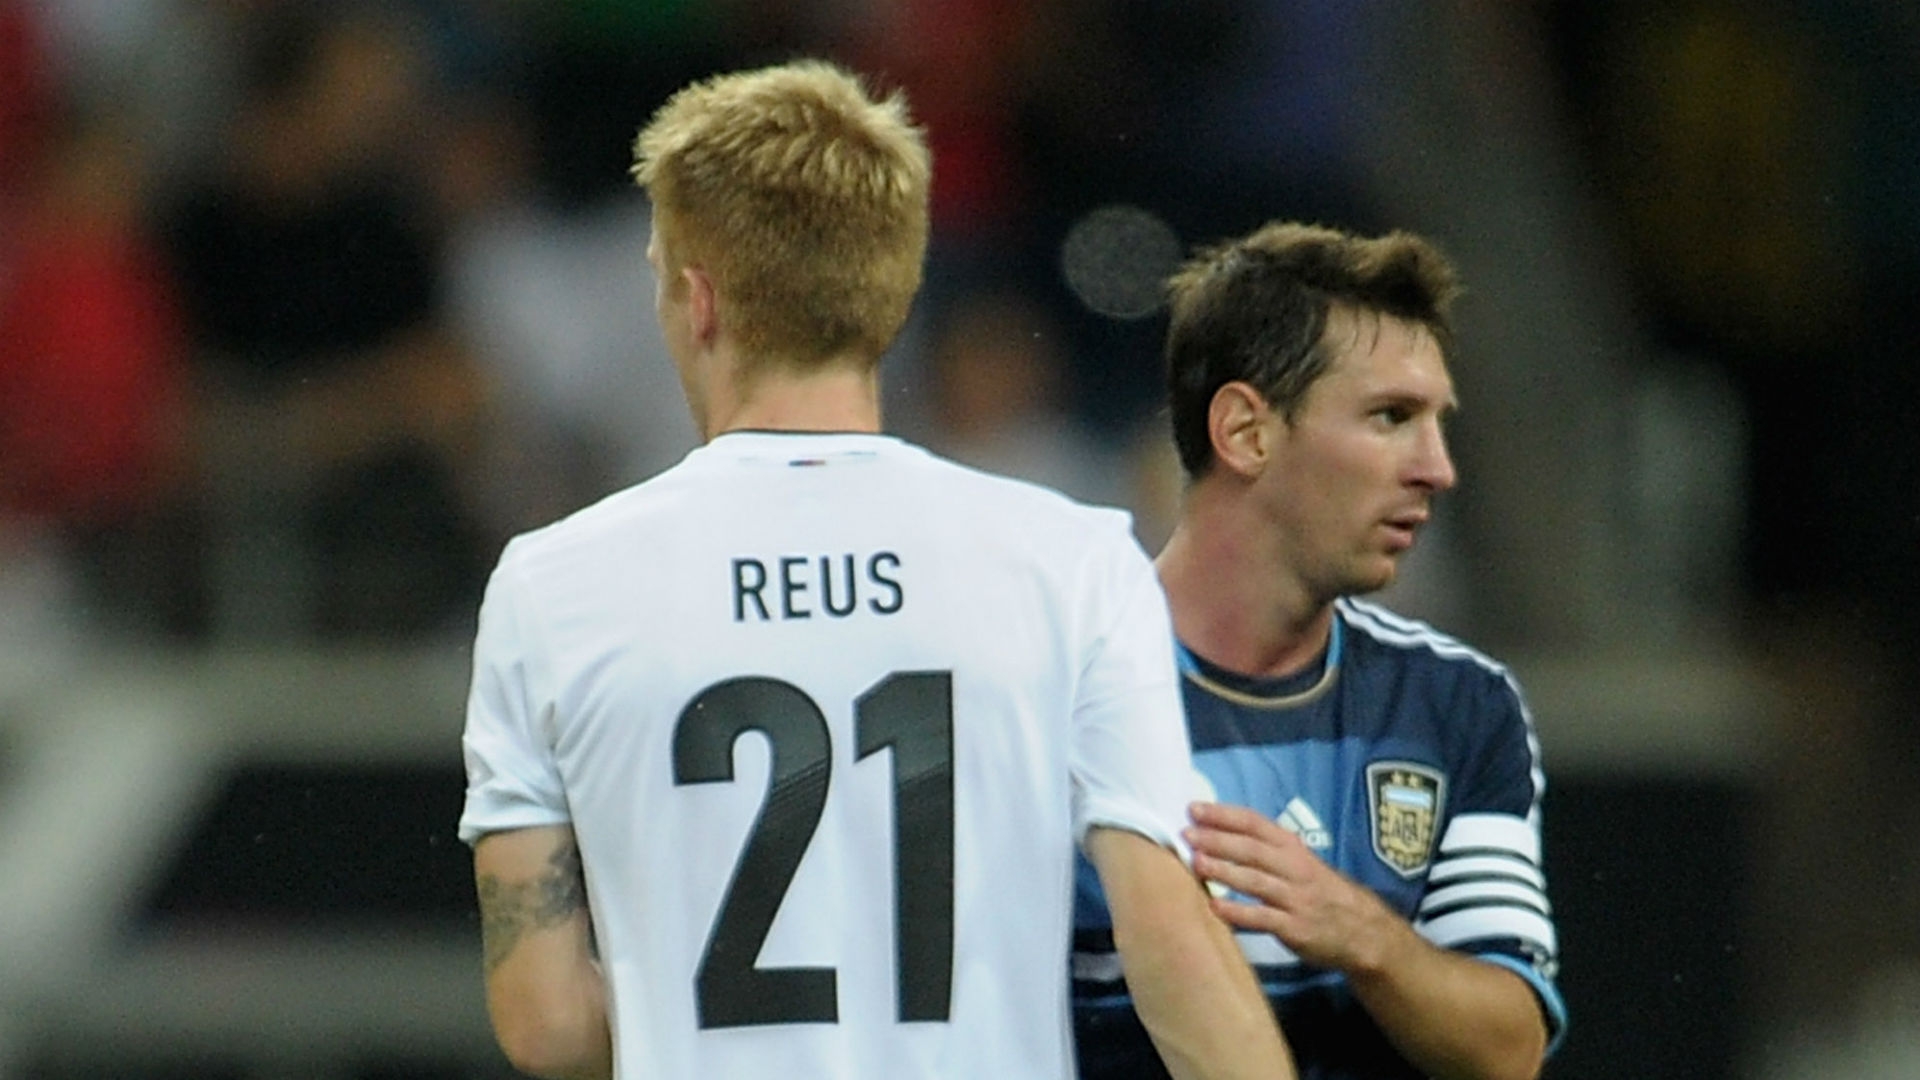 Marco Reus And Lionel Messi - Marco Reus And Messi - HD Wallpaper 